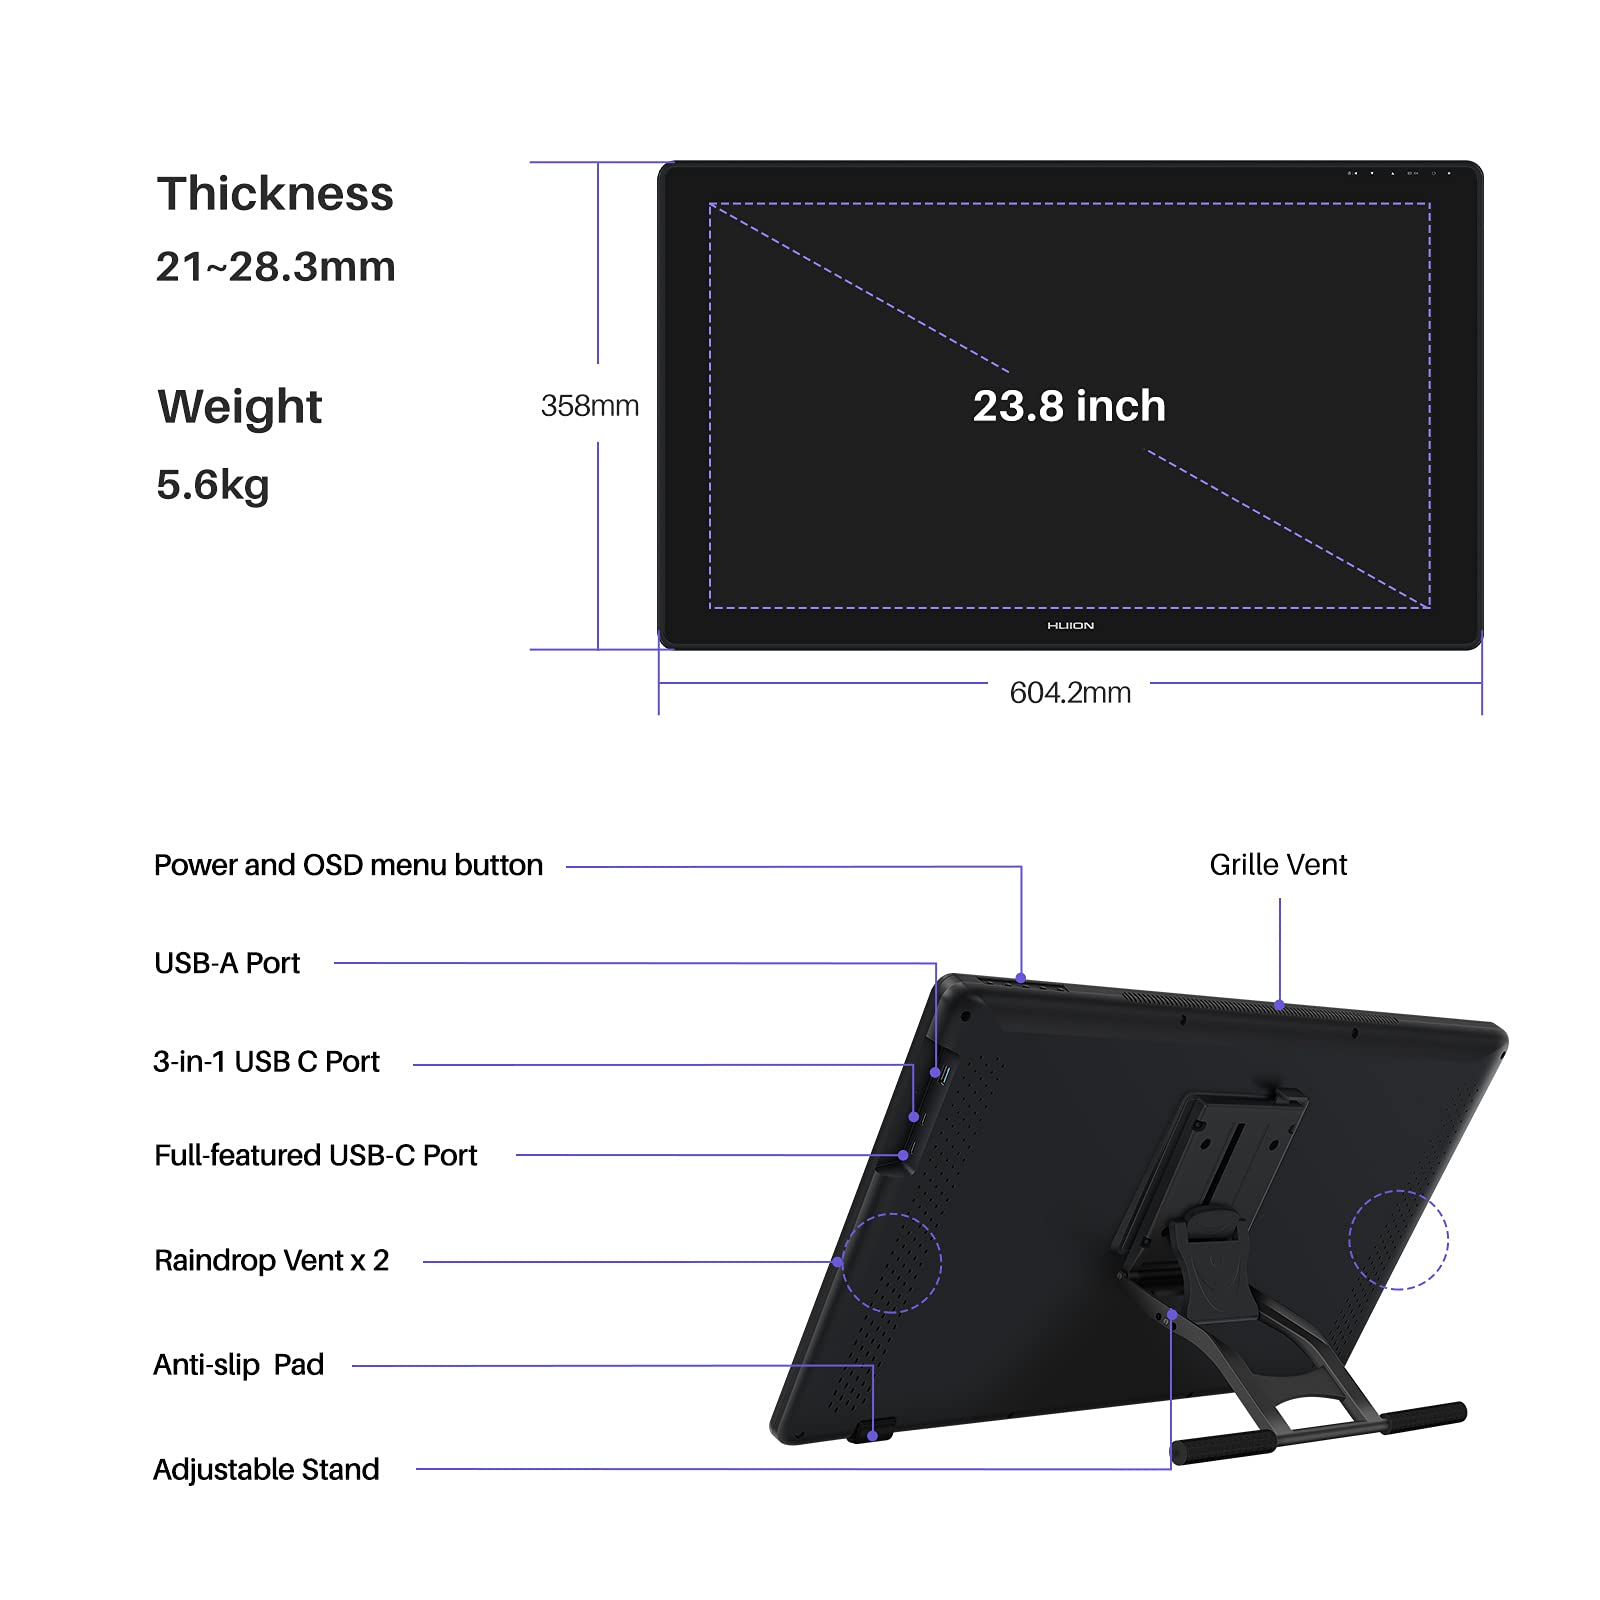 HUION Kamvas 24 Plus 2.5K QHD Graphic Drawing Tablet with Screen, 140% sRGB Full-Laminated QD Drawing Monitor with Battery-Free Stylus 8192 Pen Pressure Tilt for PC, Mac, Android, 23.8inch Pen Display